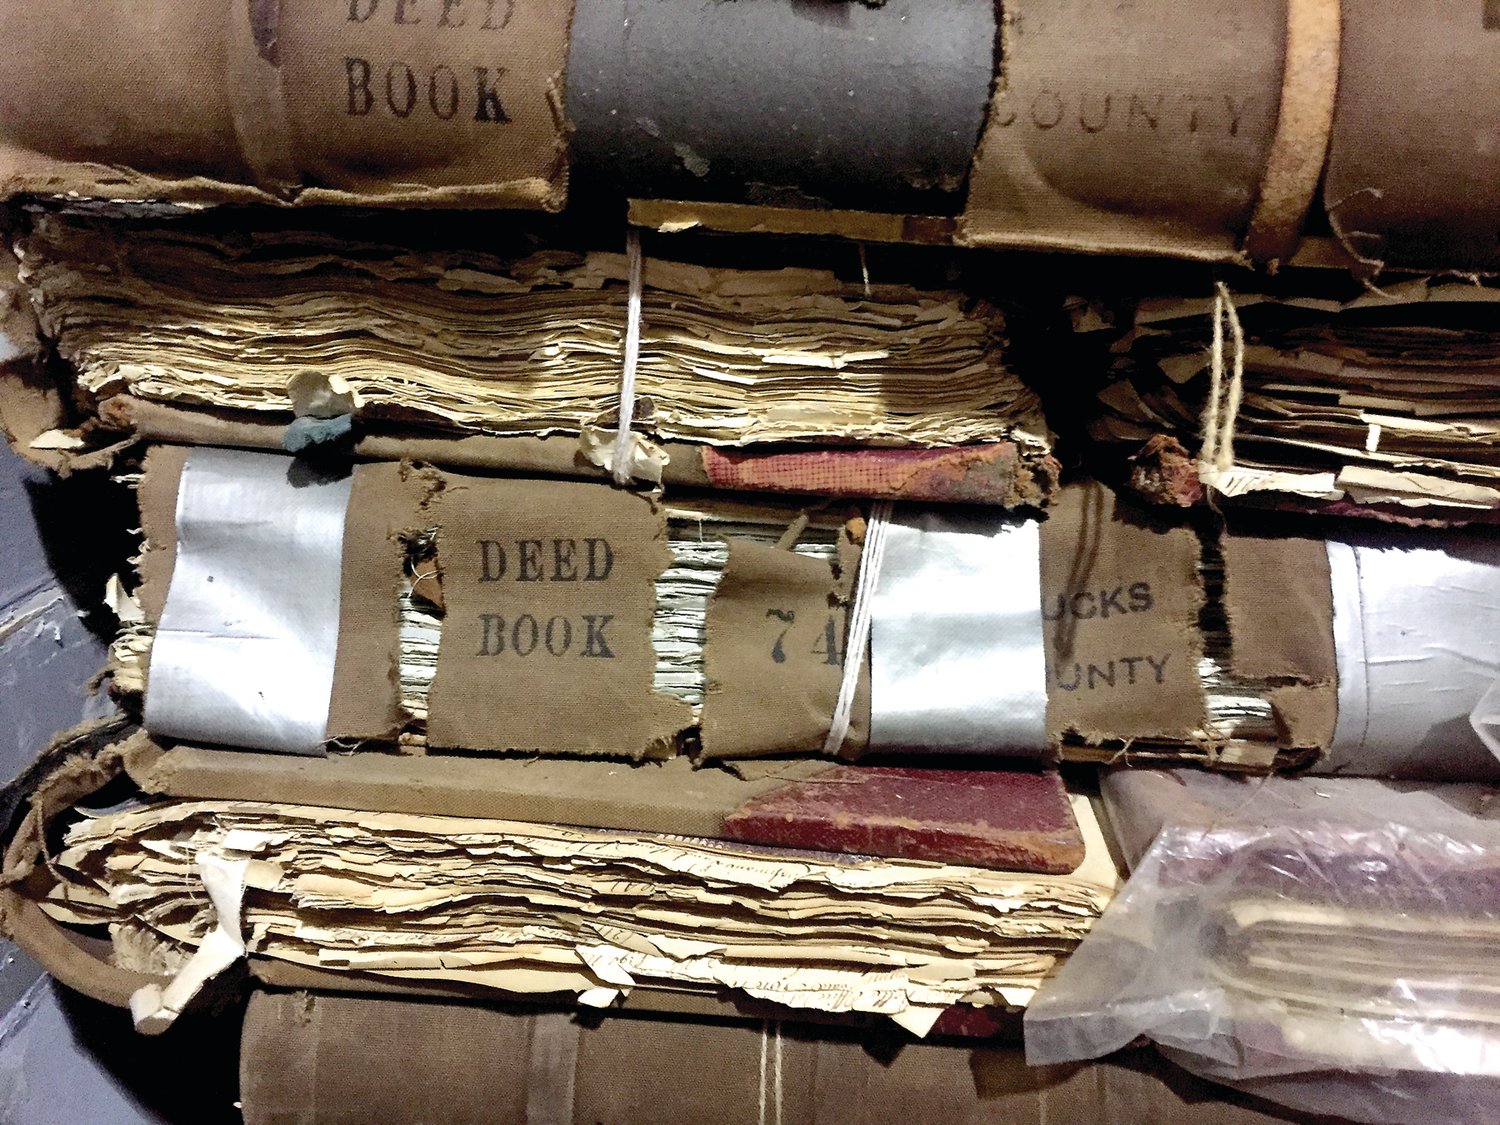 The Recorder of Deeds is dedicated to restoring the deed books and preserving the history of Bucks County landowners.